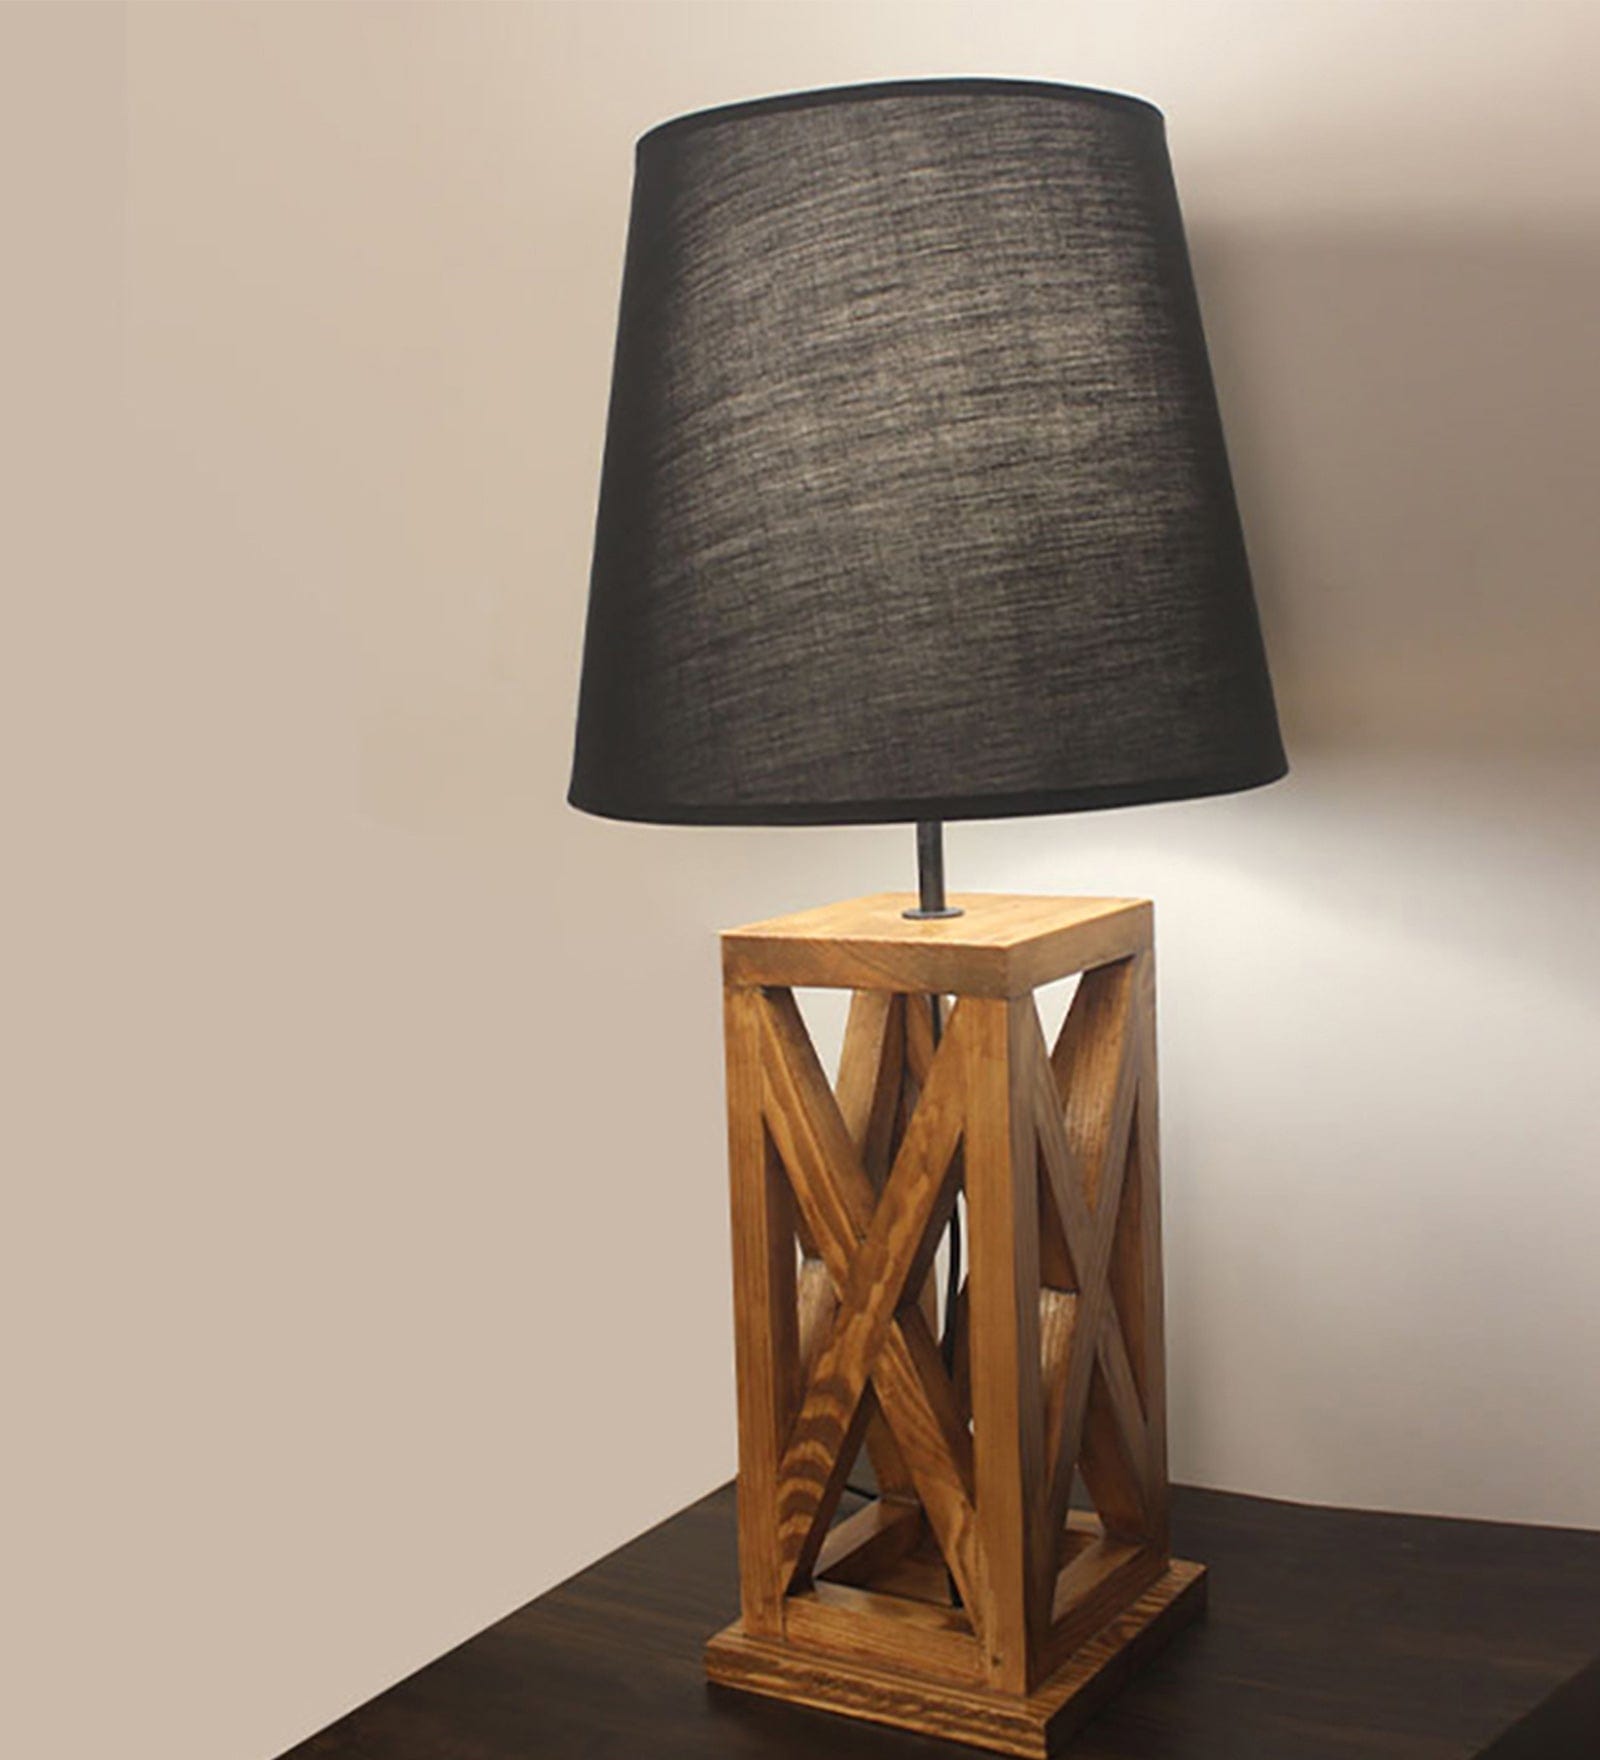 Symmetric Brown Wooden Table Lamp with Black Fabric Lampshade (BULB NOT INCLUDED)